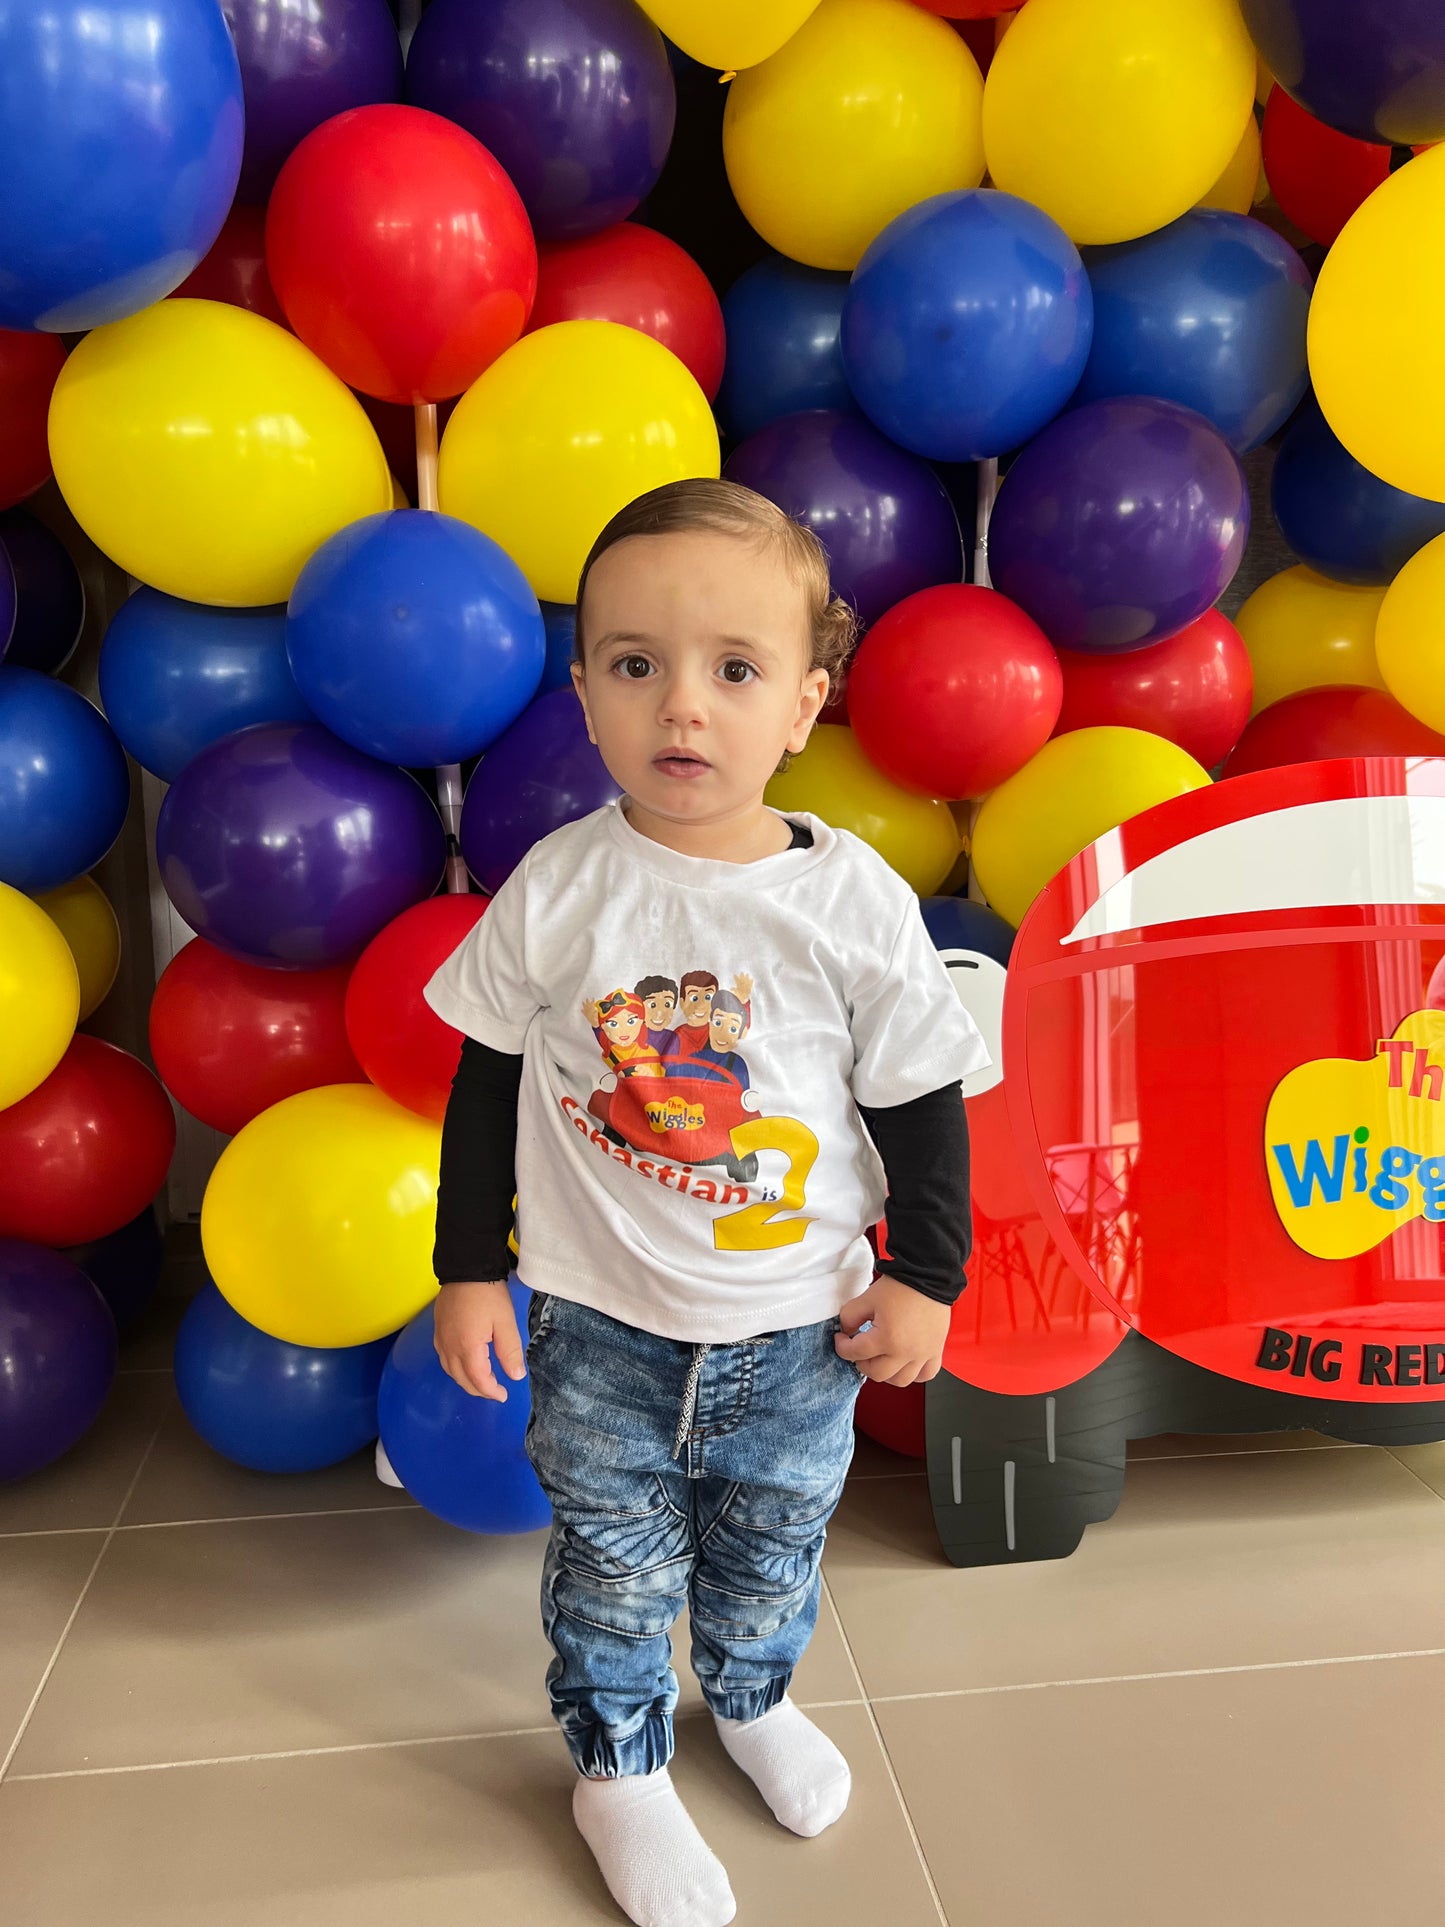 Wiggles 'Big Red Car' Sign/Party Prop